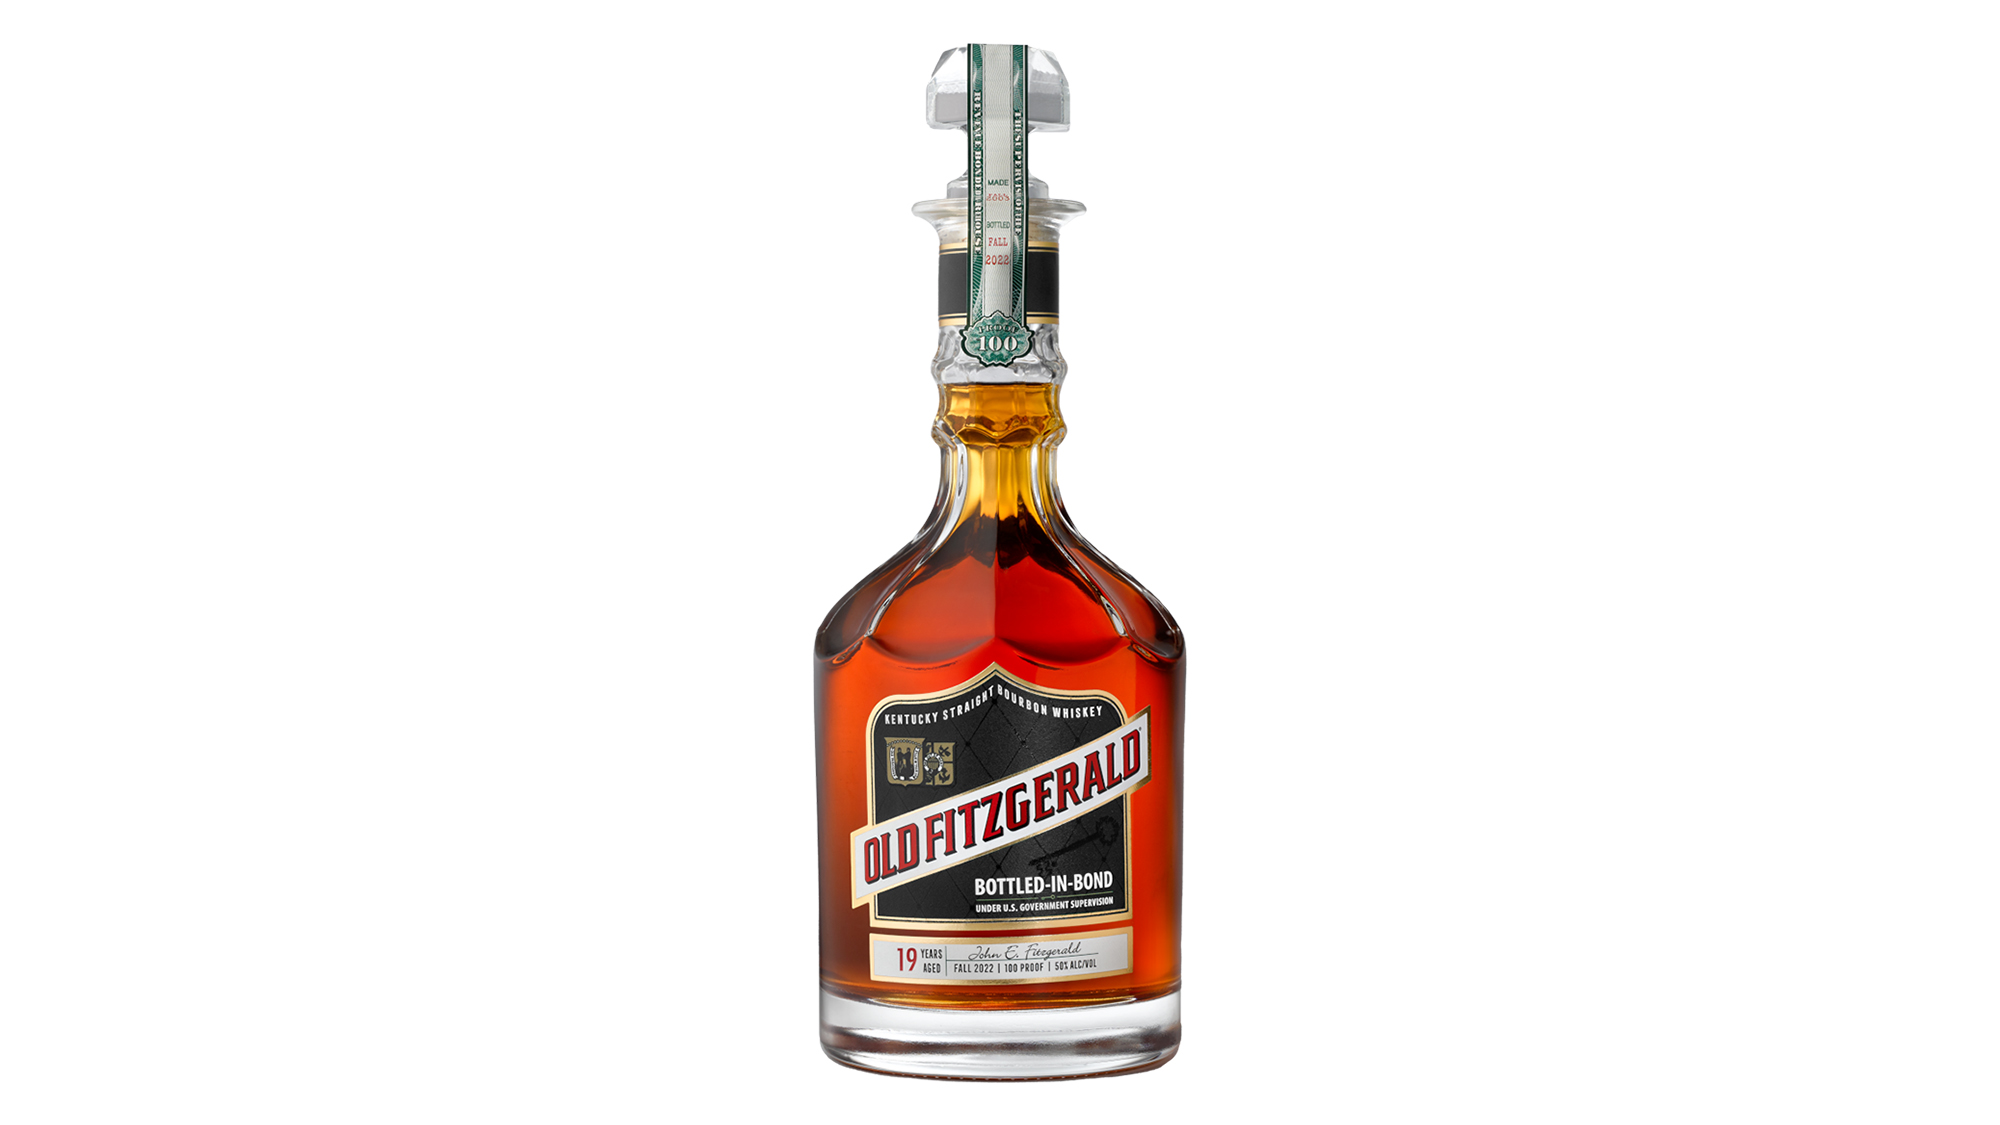 Old Fitzgerald Just Unveiled Its Oldest Bottled-in-Bond Bourbon To Date